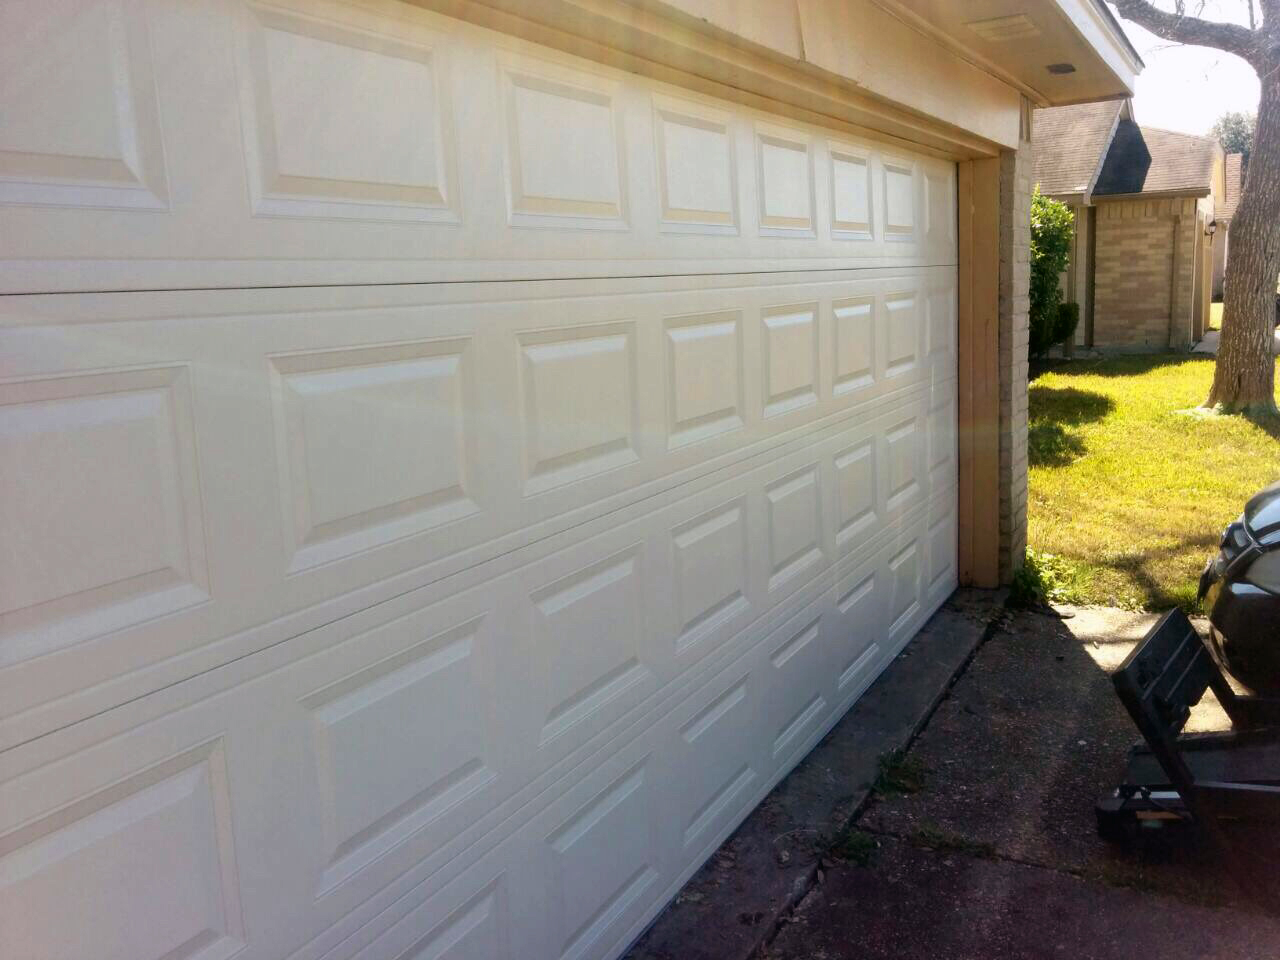 The Pros and Cons of Having a Garage Door with Connectivity in Florida